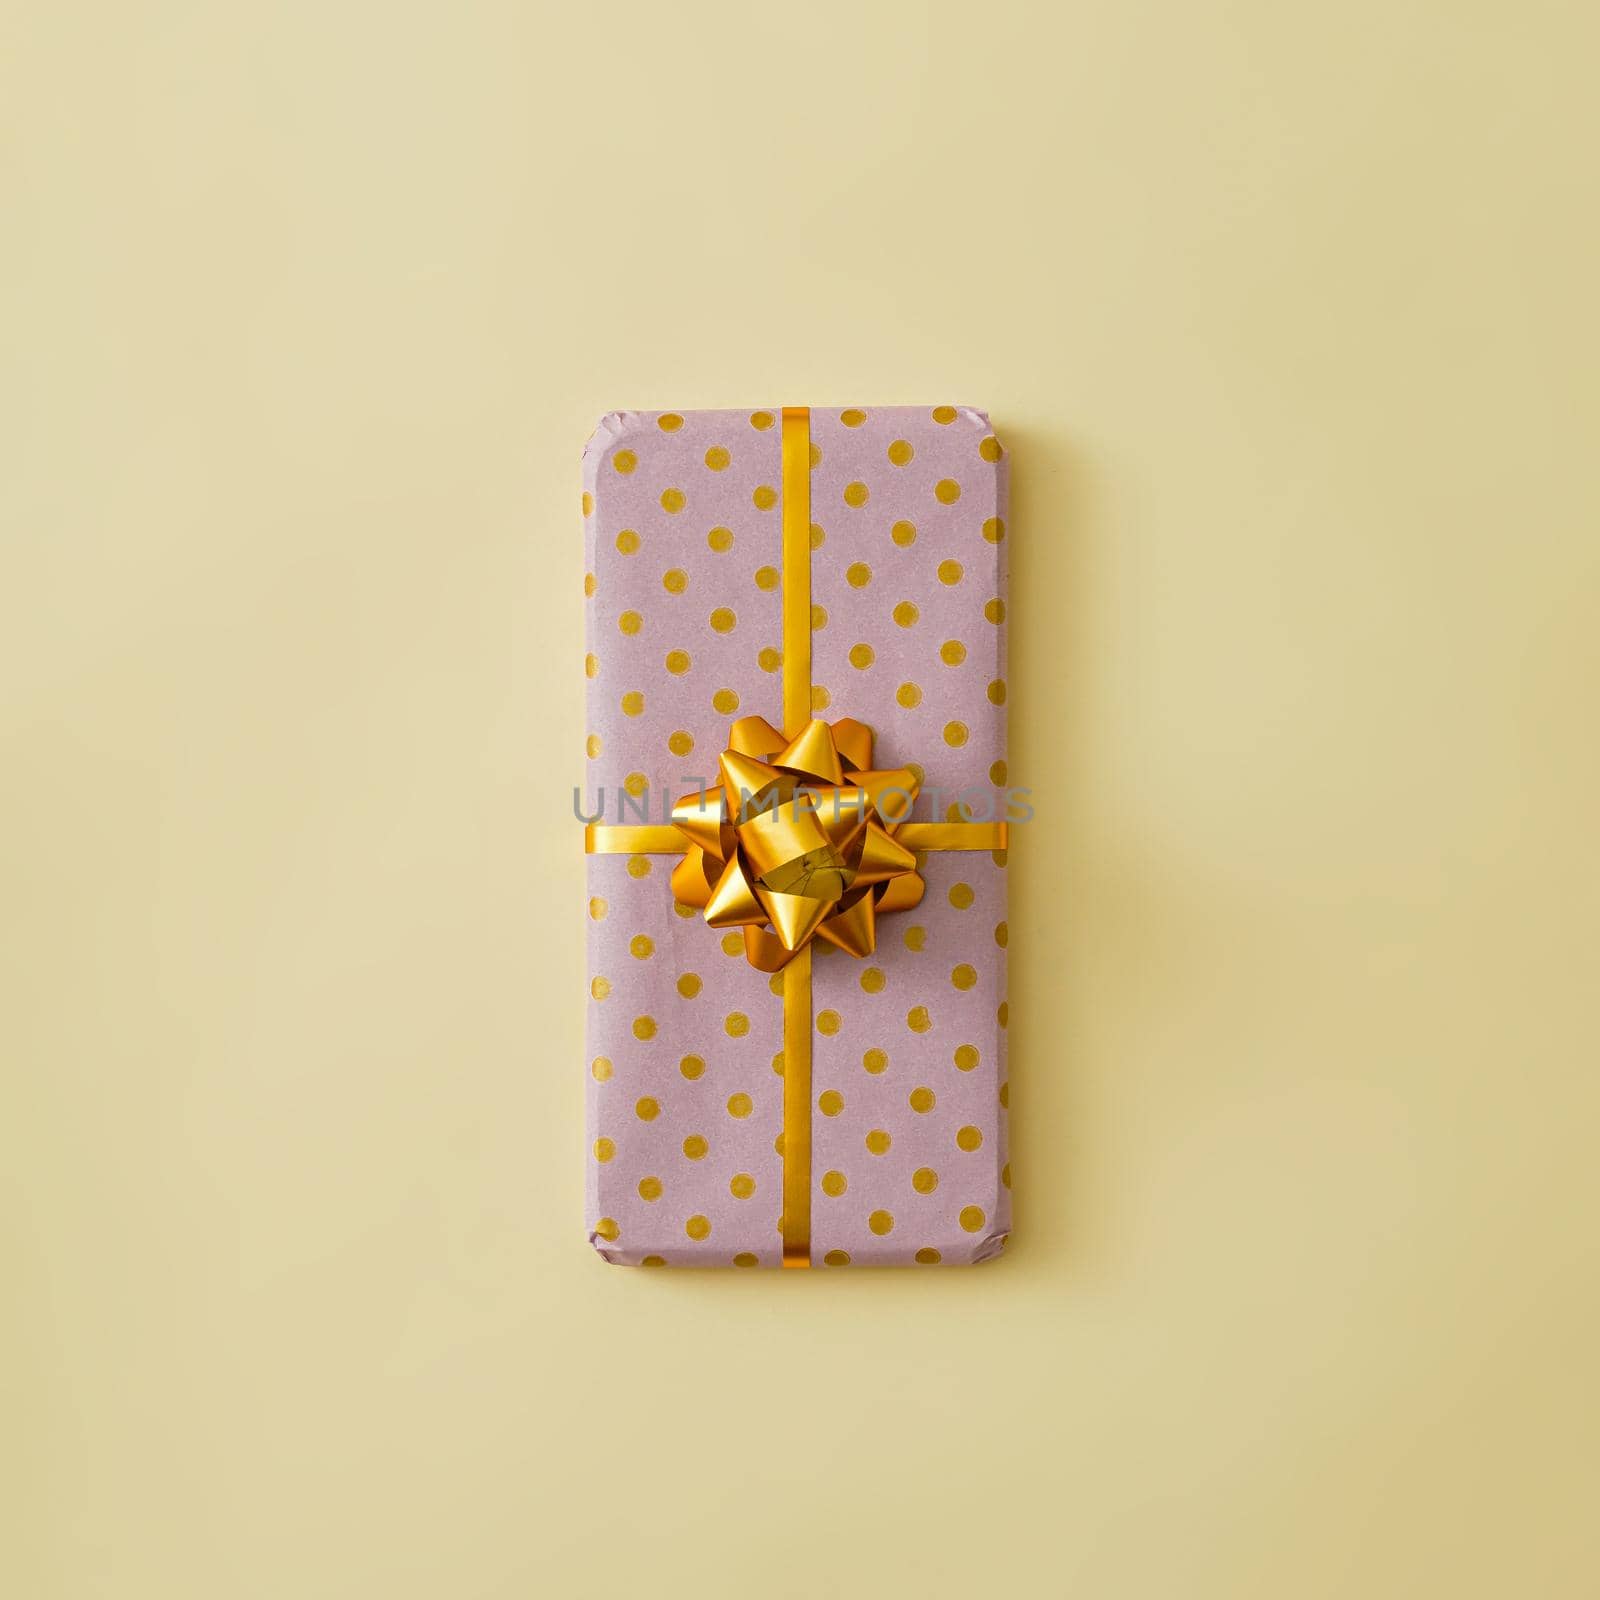 The mobile phone is gift-wrapped with a gold ribbon and a bow. Minimal modern gift concept. by sergii_gnatiuk